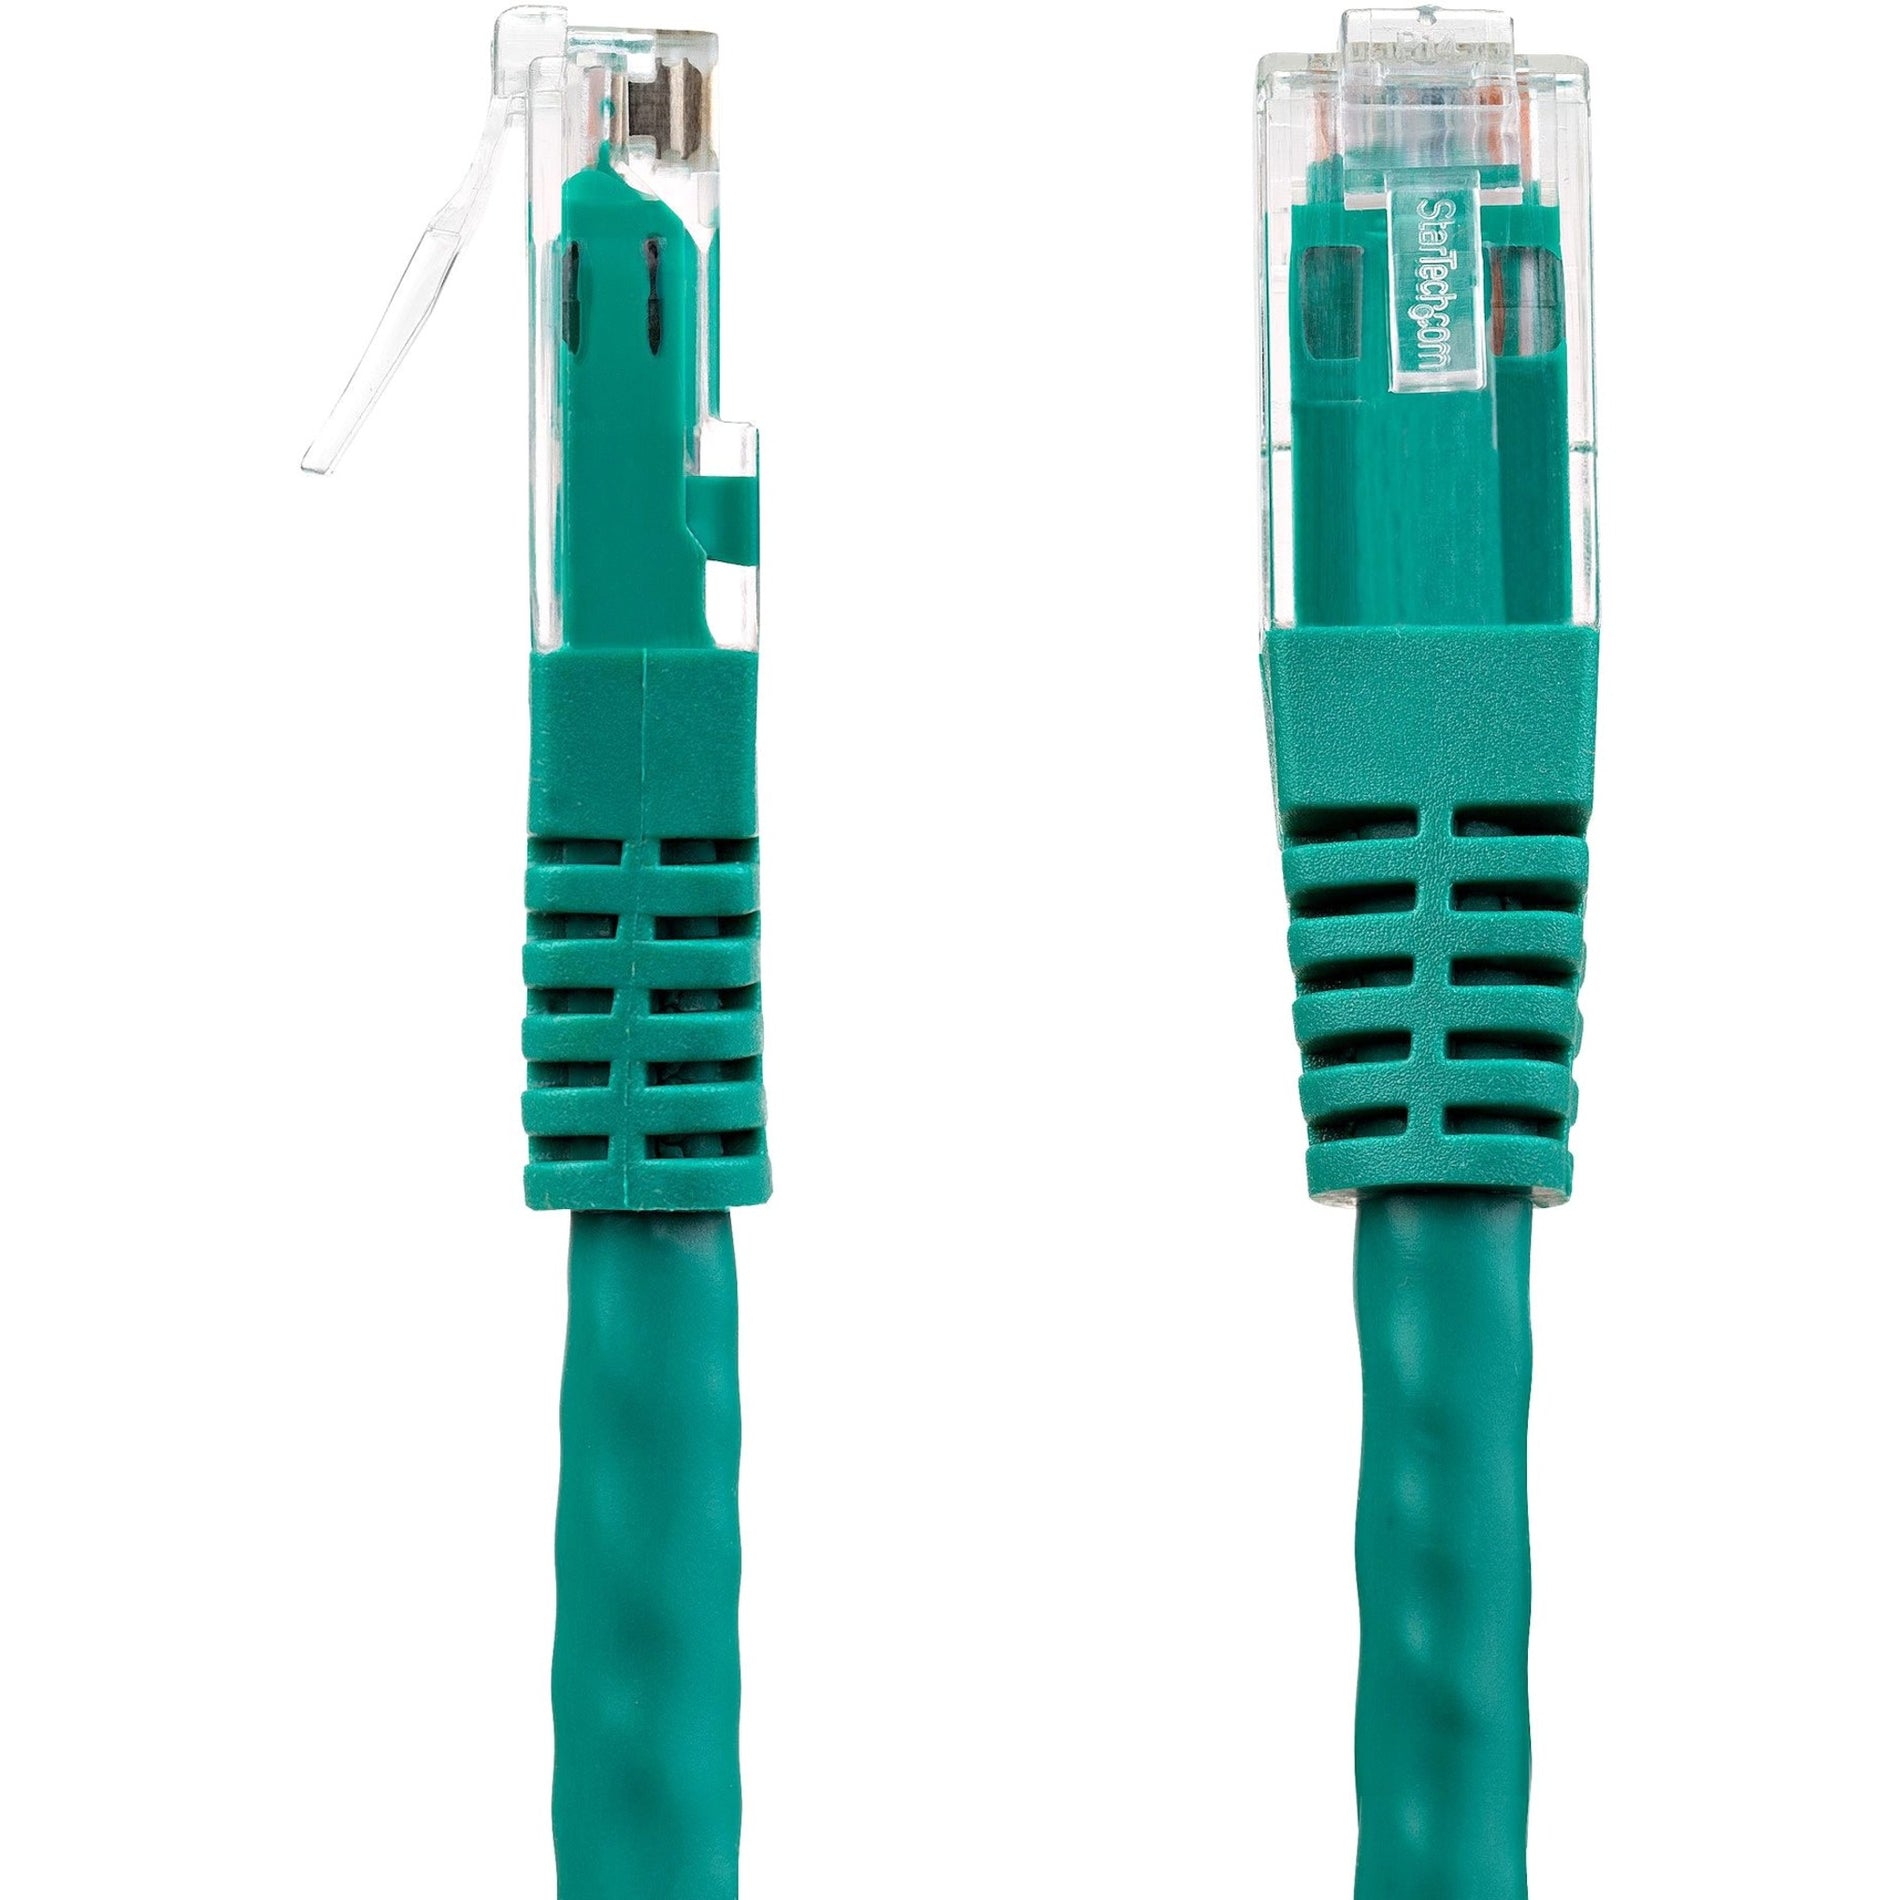 StarTech.com C6PATCH35GN 35ft Green Cat6 UTP Patch Cable ETL Verified, Strain Relief, Corrosion Resistant, Fray Resistant, PoE++, Rust Resistant, Bend Resistant, Snagless Boot, 10 Gbit/s Data Transfer Rate